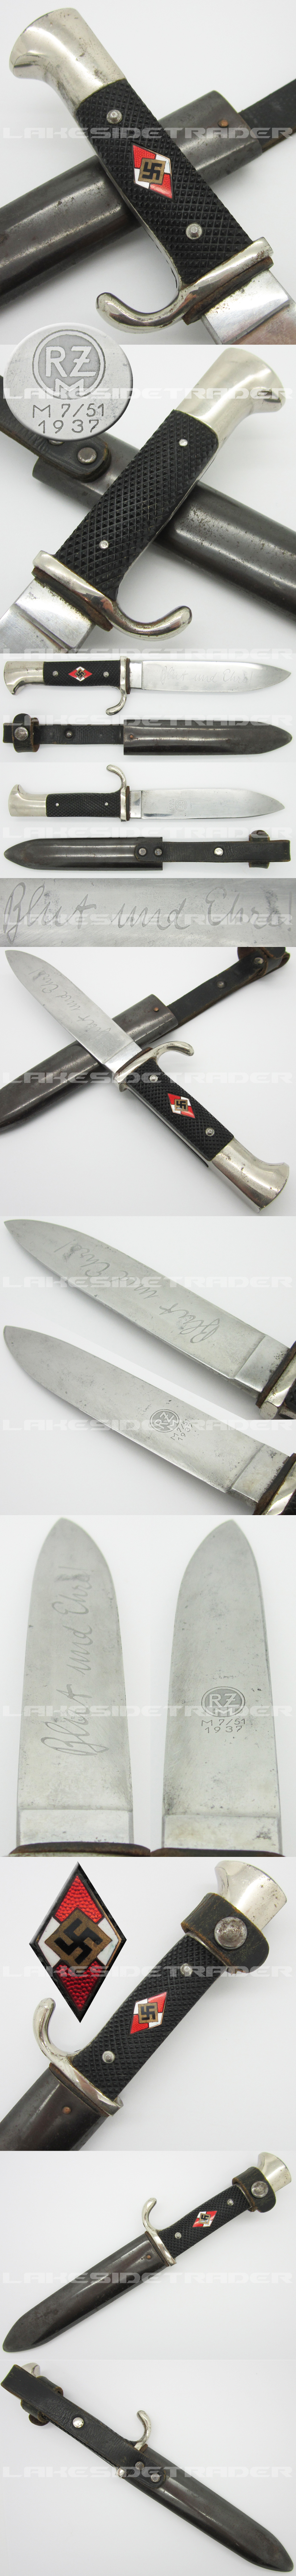 Transitional Hitler Youth Knife by RZM M7/51 1937